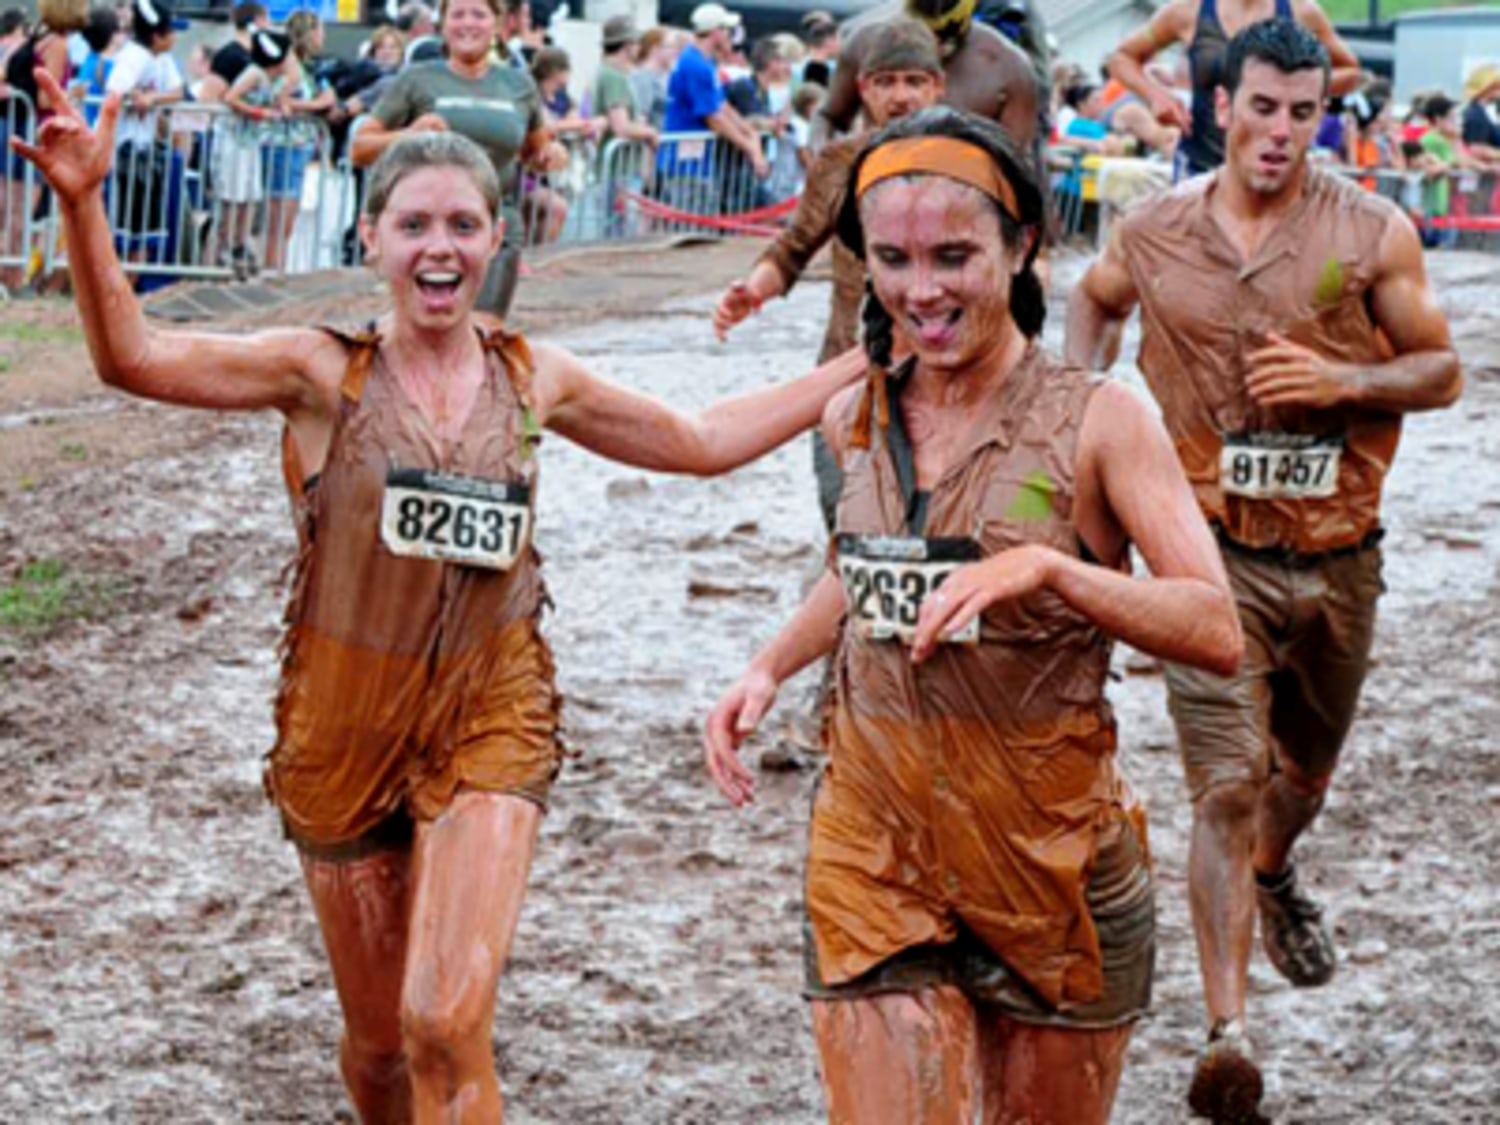 10 tips for your first Mud Run